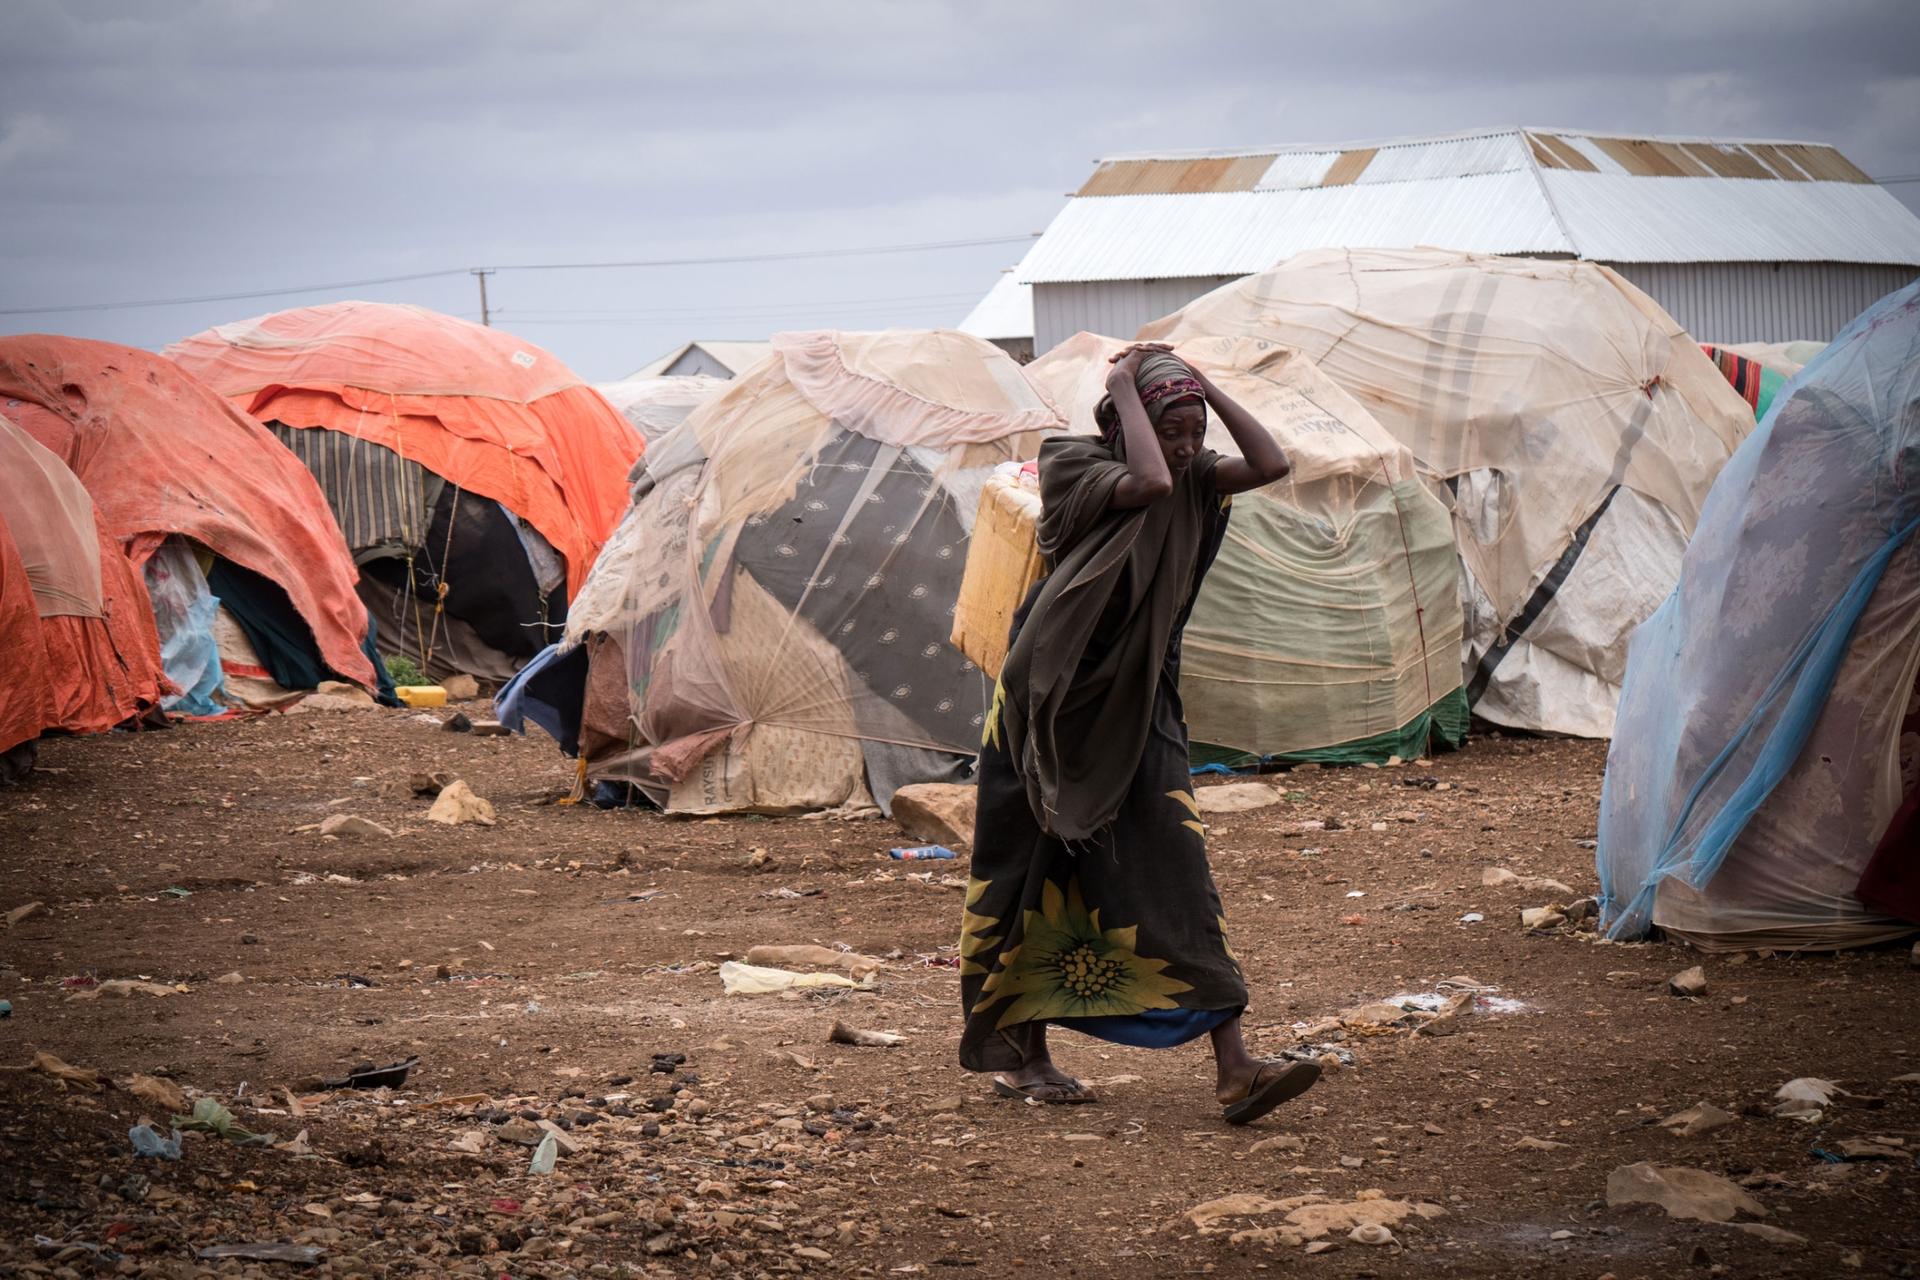 A displaced woman in front of orange- and white-covered tents at a camp in Baidoa, Somalia. 